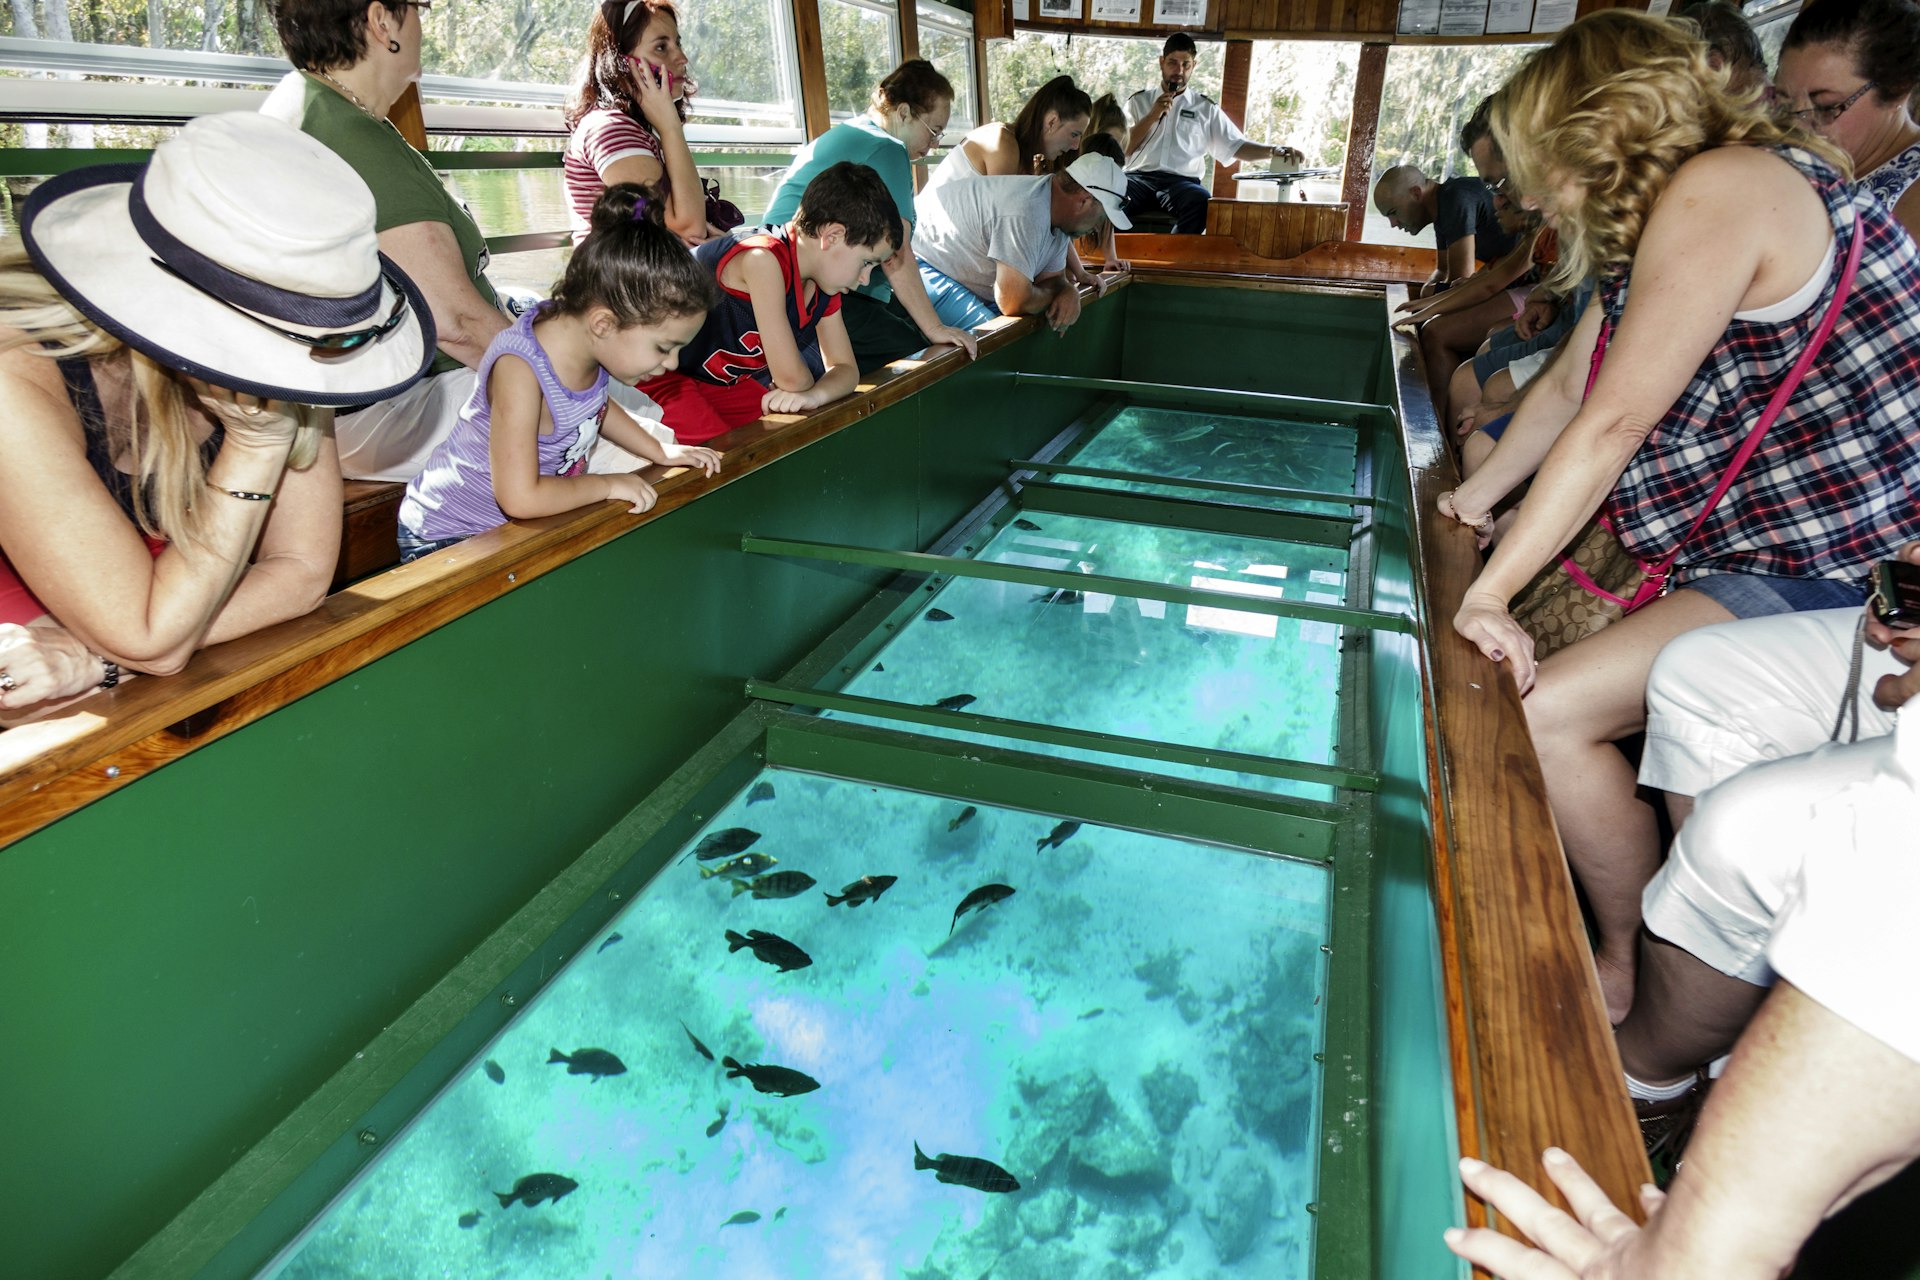 Passengers crowd around to look at fish through the floor of a glass-bottom boat